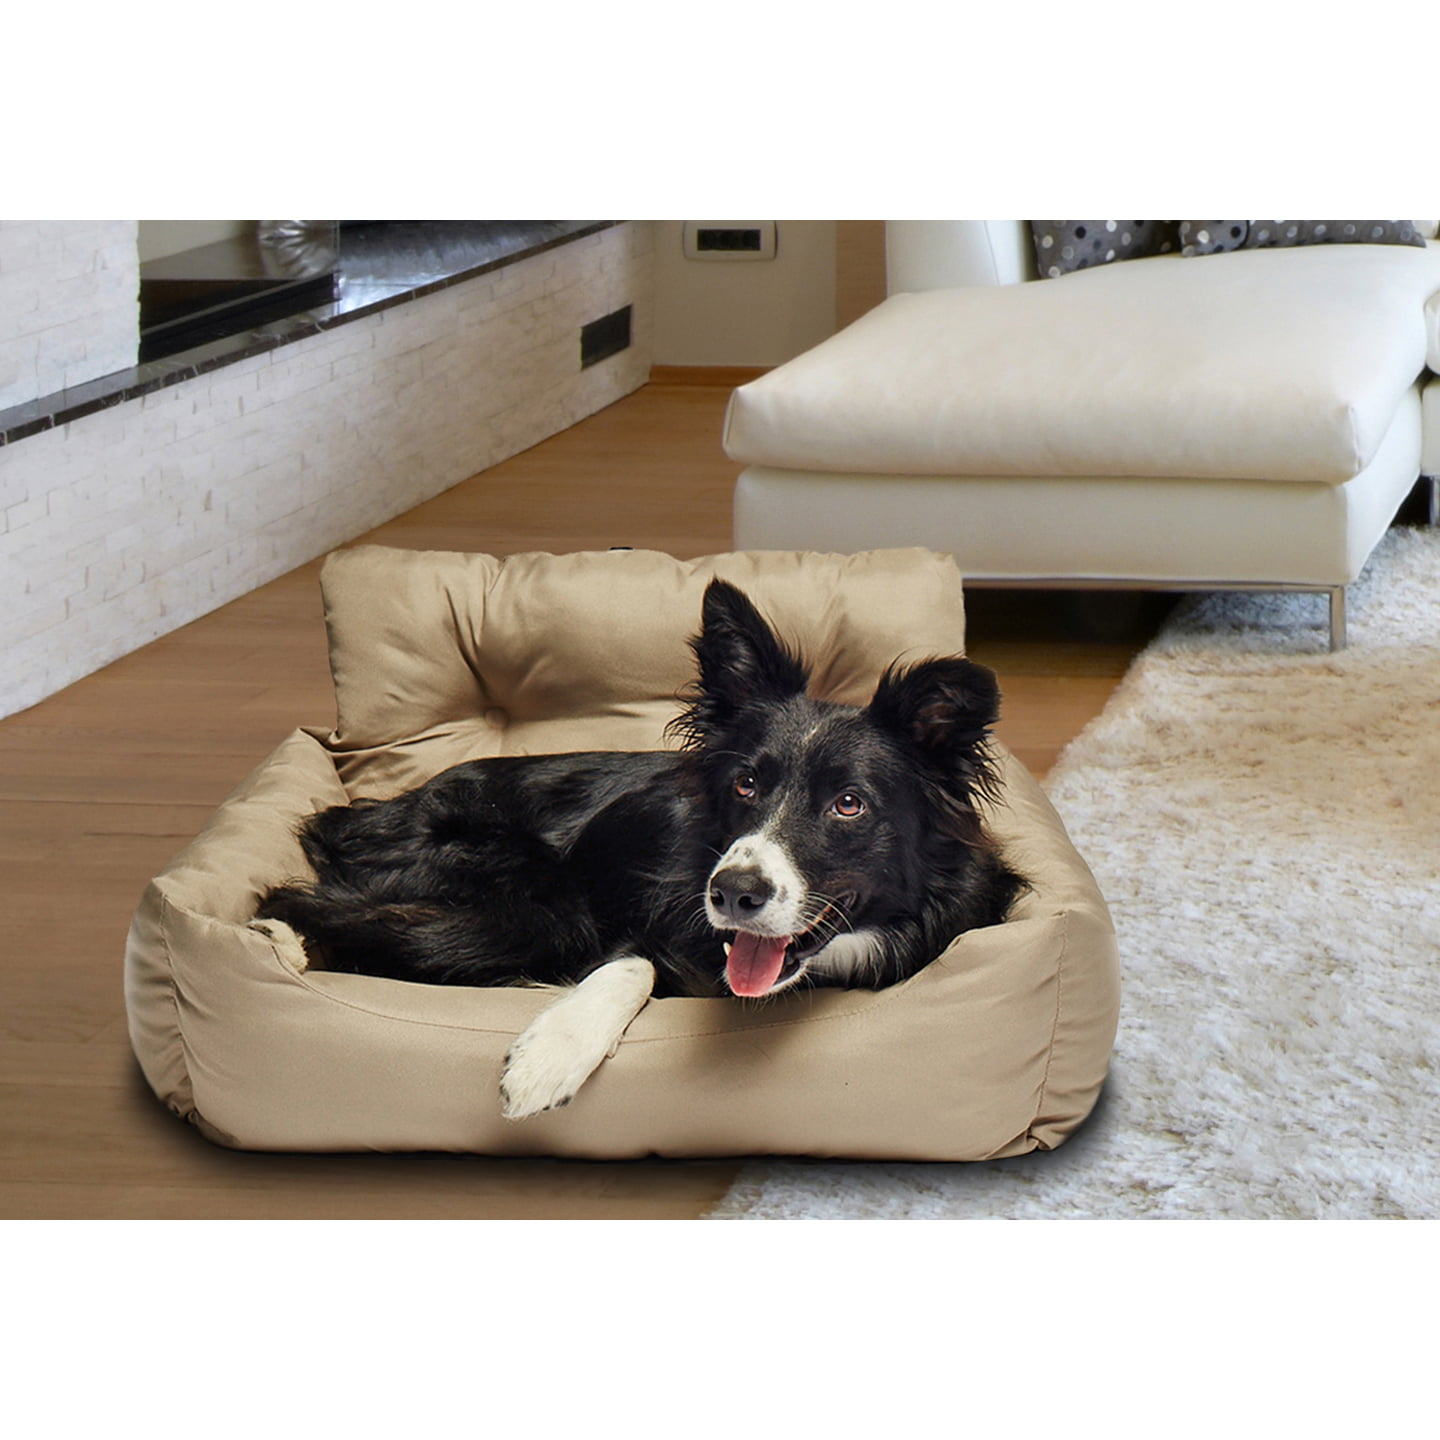 Cold Movie Theater or Traveling Sofa Cute Little Dog Sofa Blanket is Suitable for Bed Camping A for Your Family and Friends .